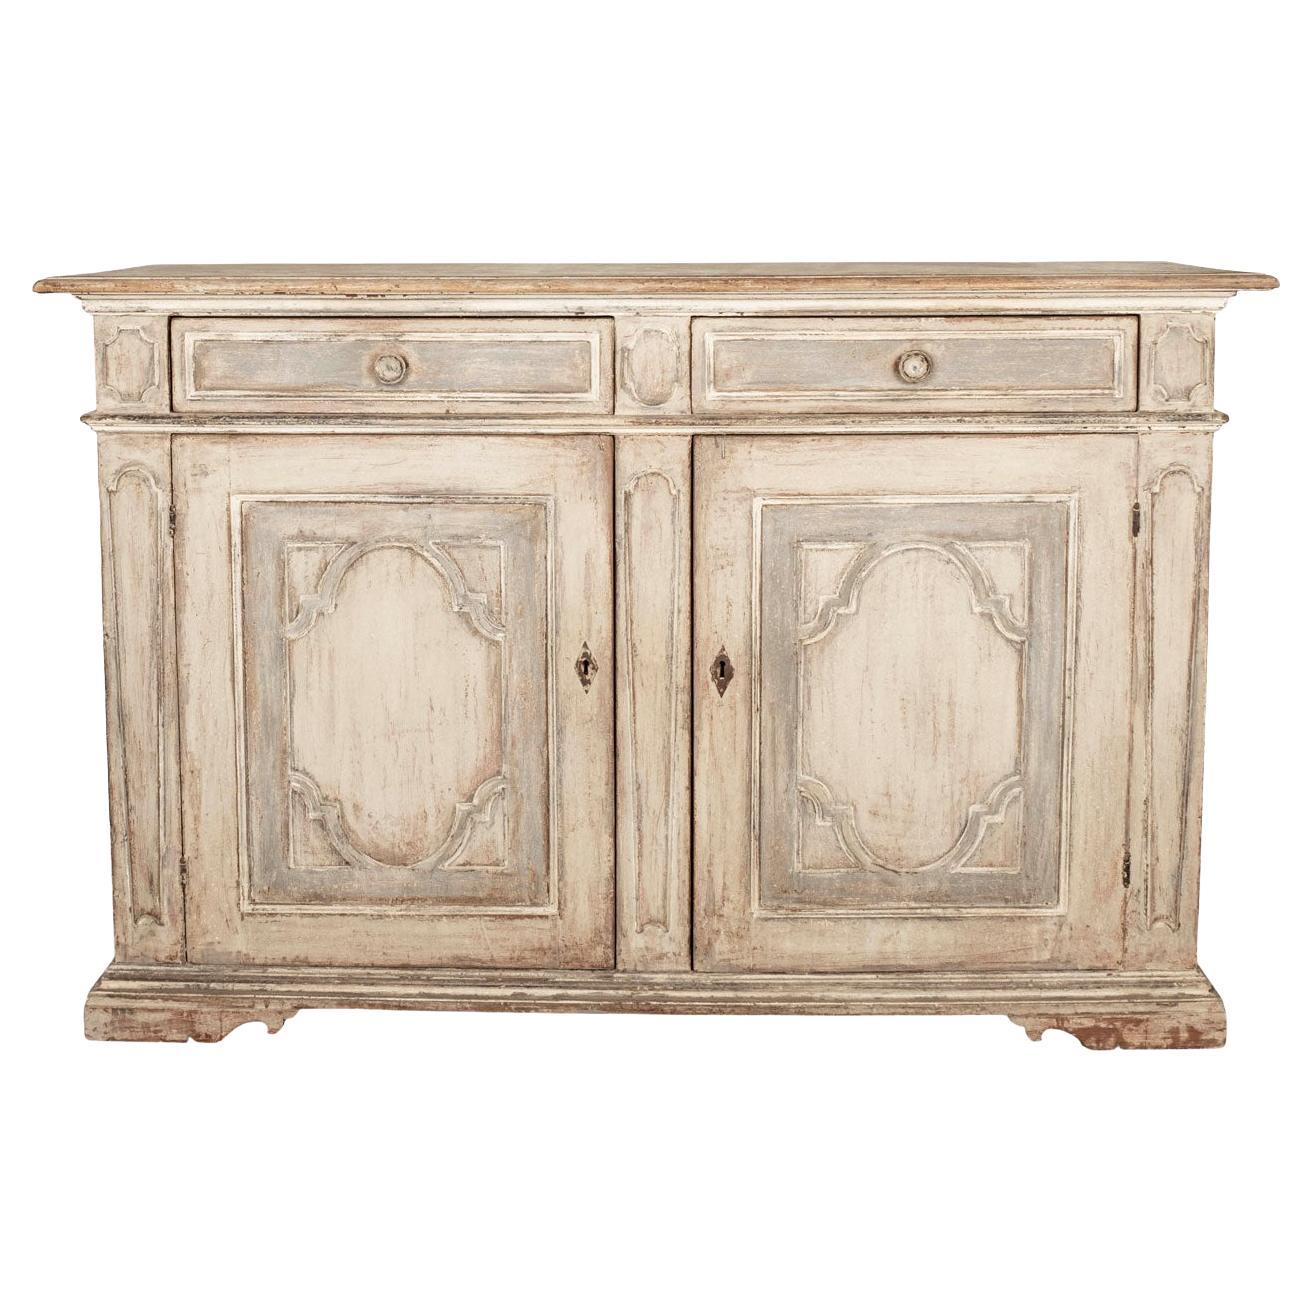 18th Century Tuscan Painted Credenza From Italy